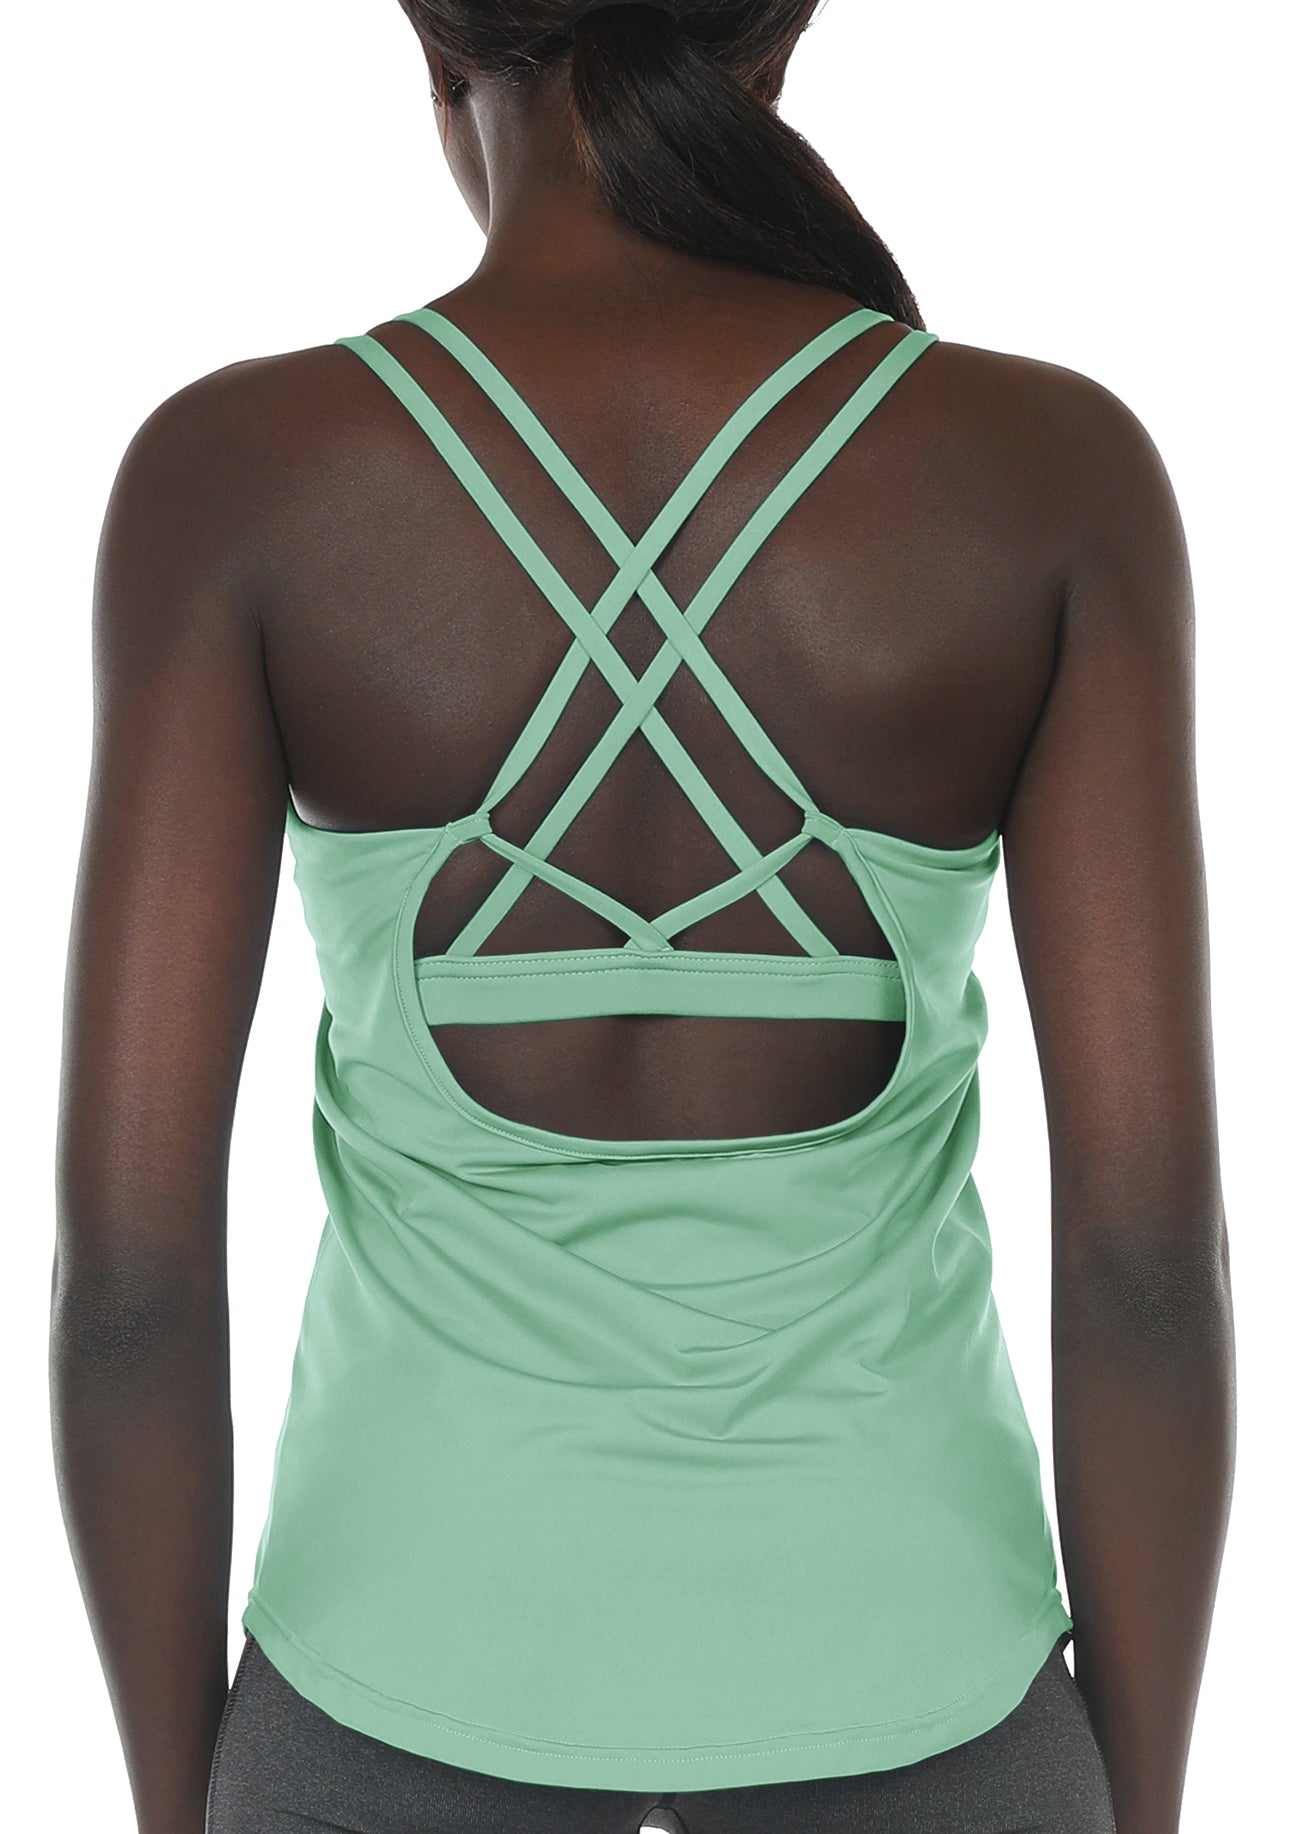 Women Yoga Tops With Built in Bra Gym Strappy Back Top Fitness